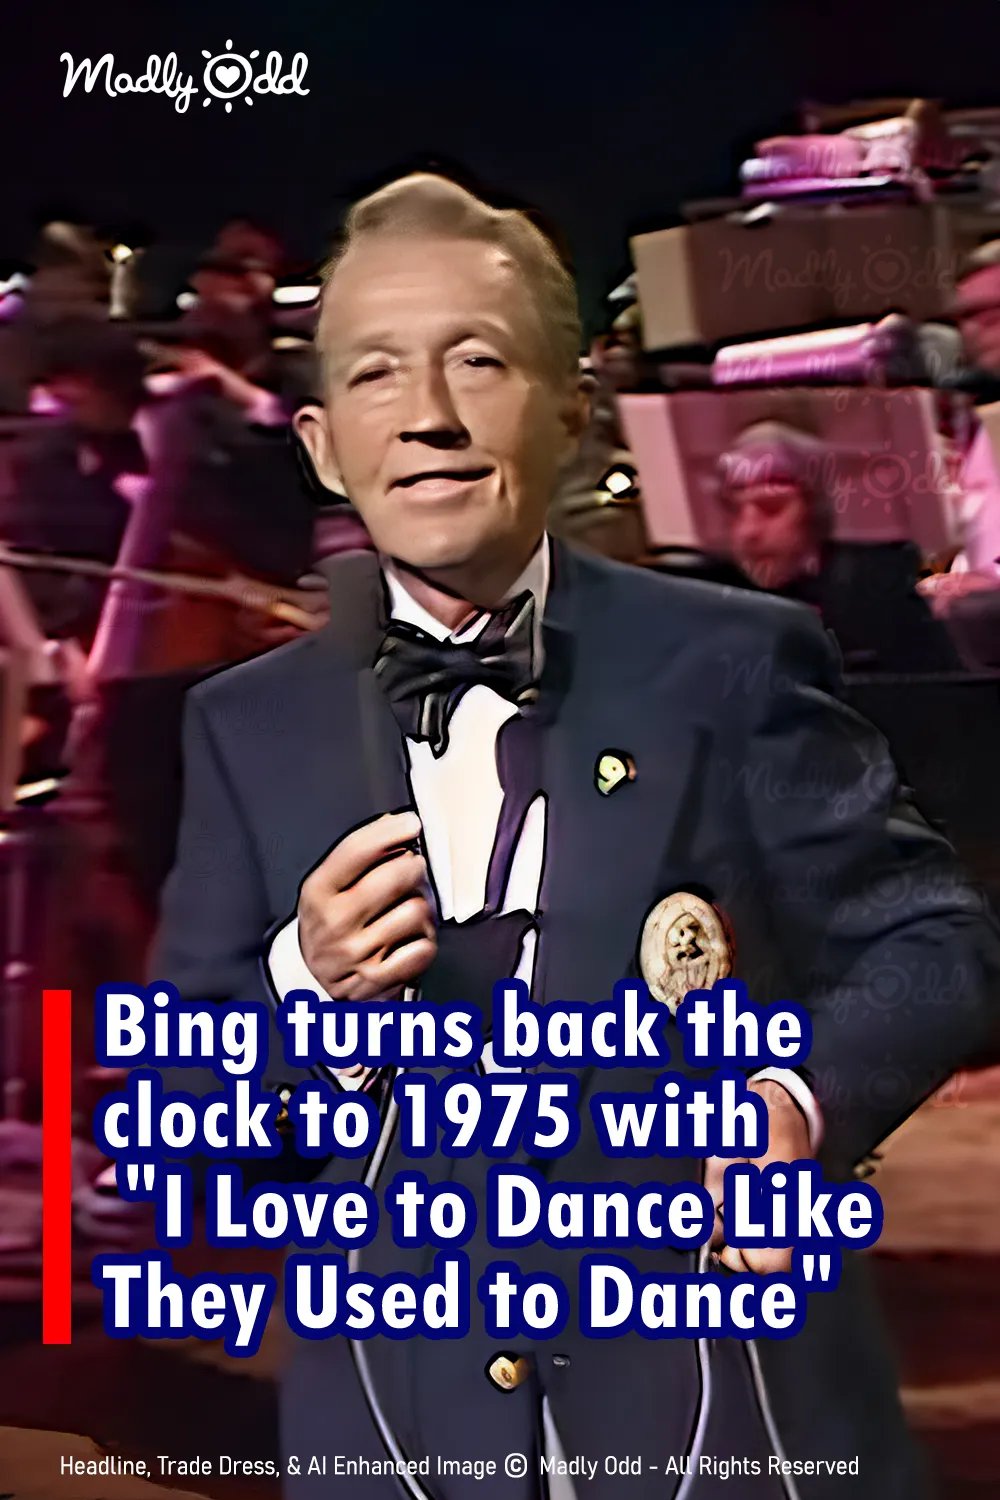 Bing Crosby turns back the clock to 1975 with \'I Love to Dance Like They Used to Dance\'